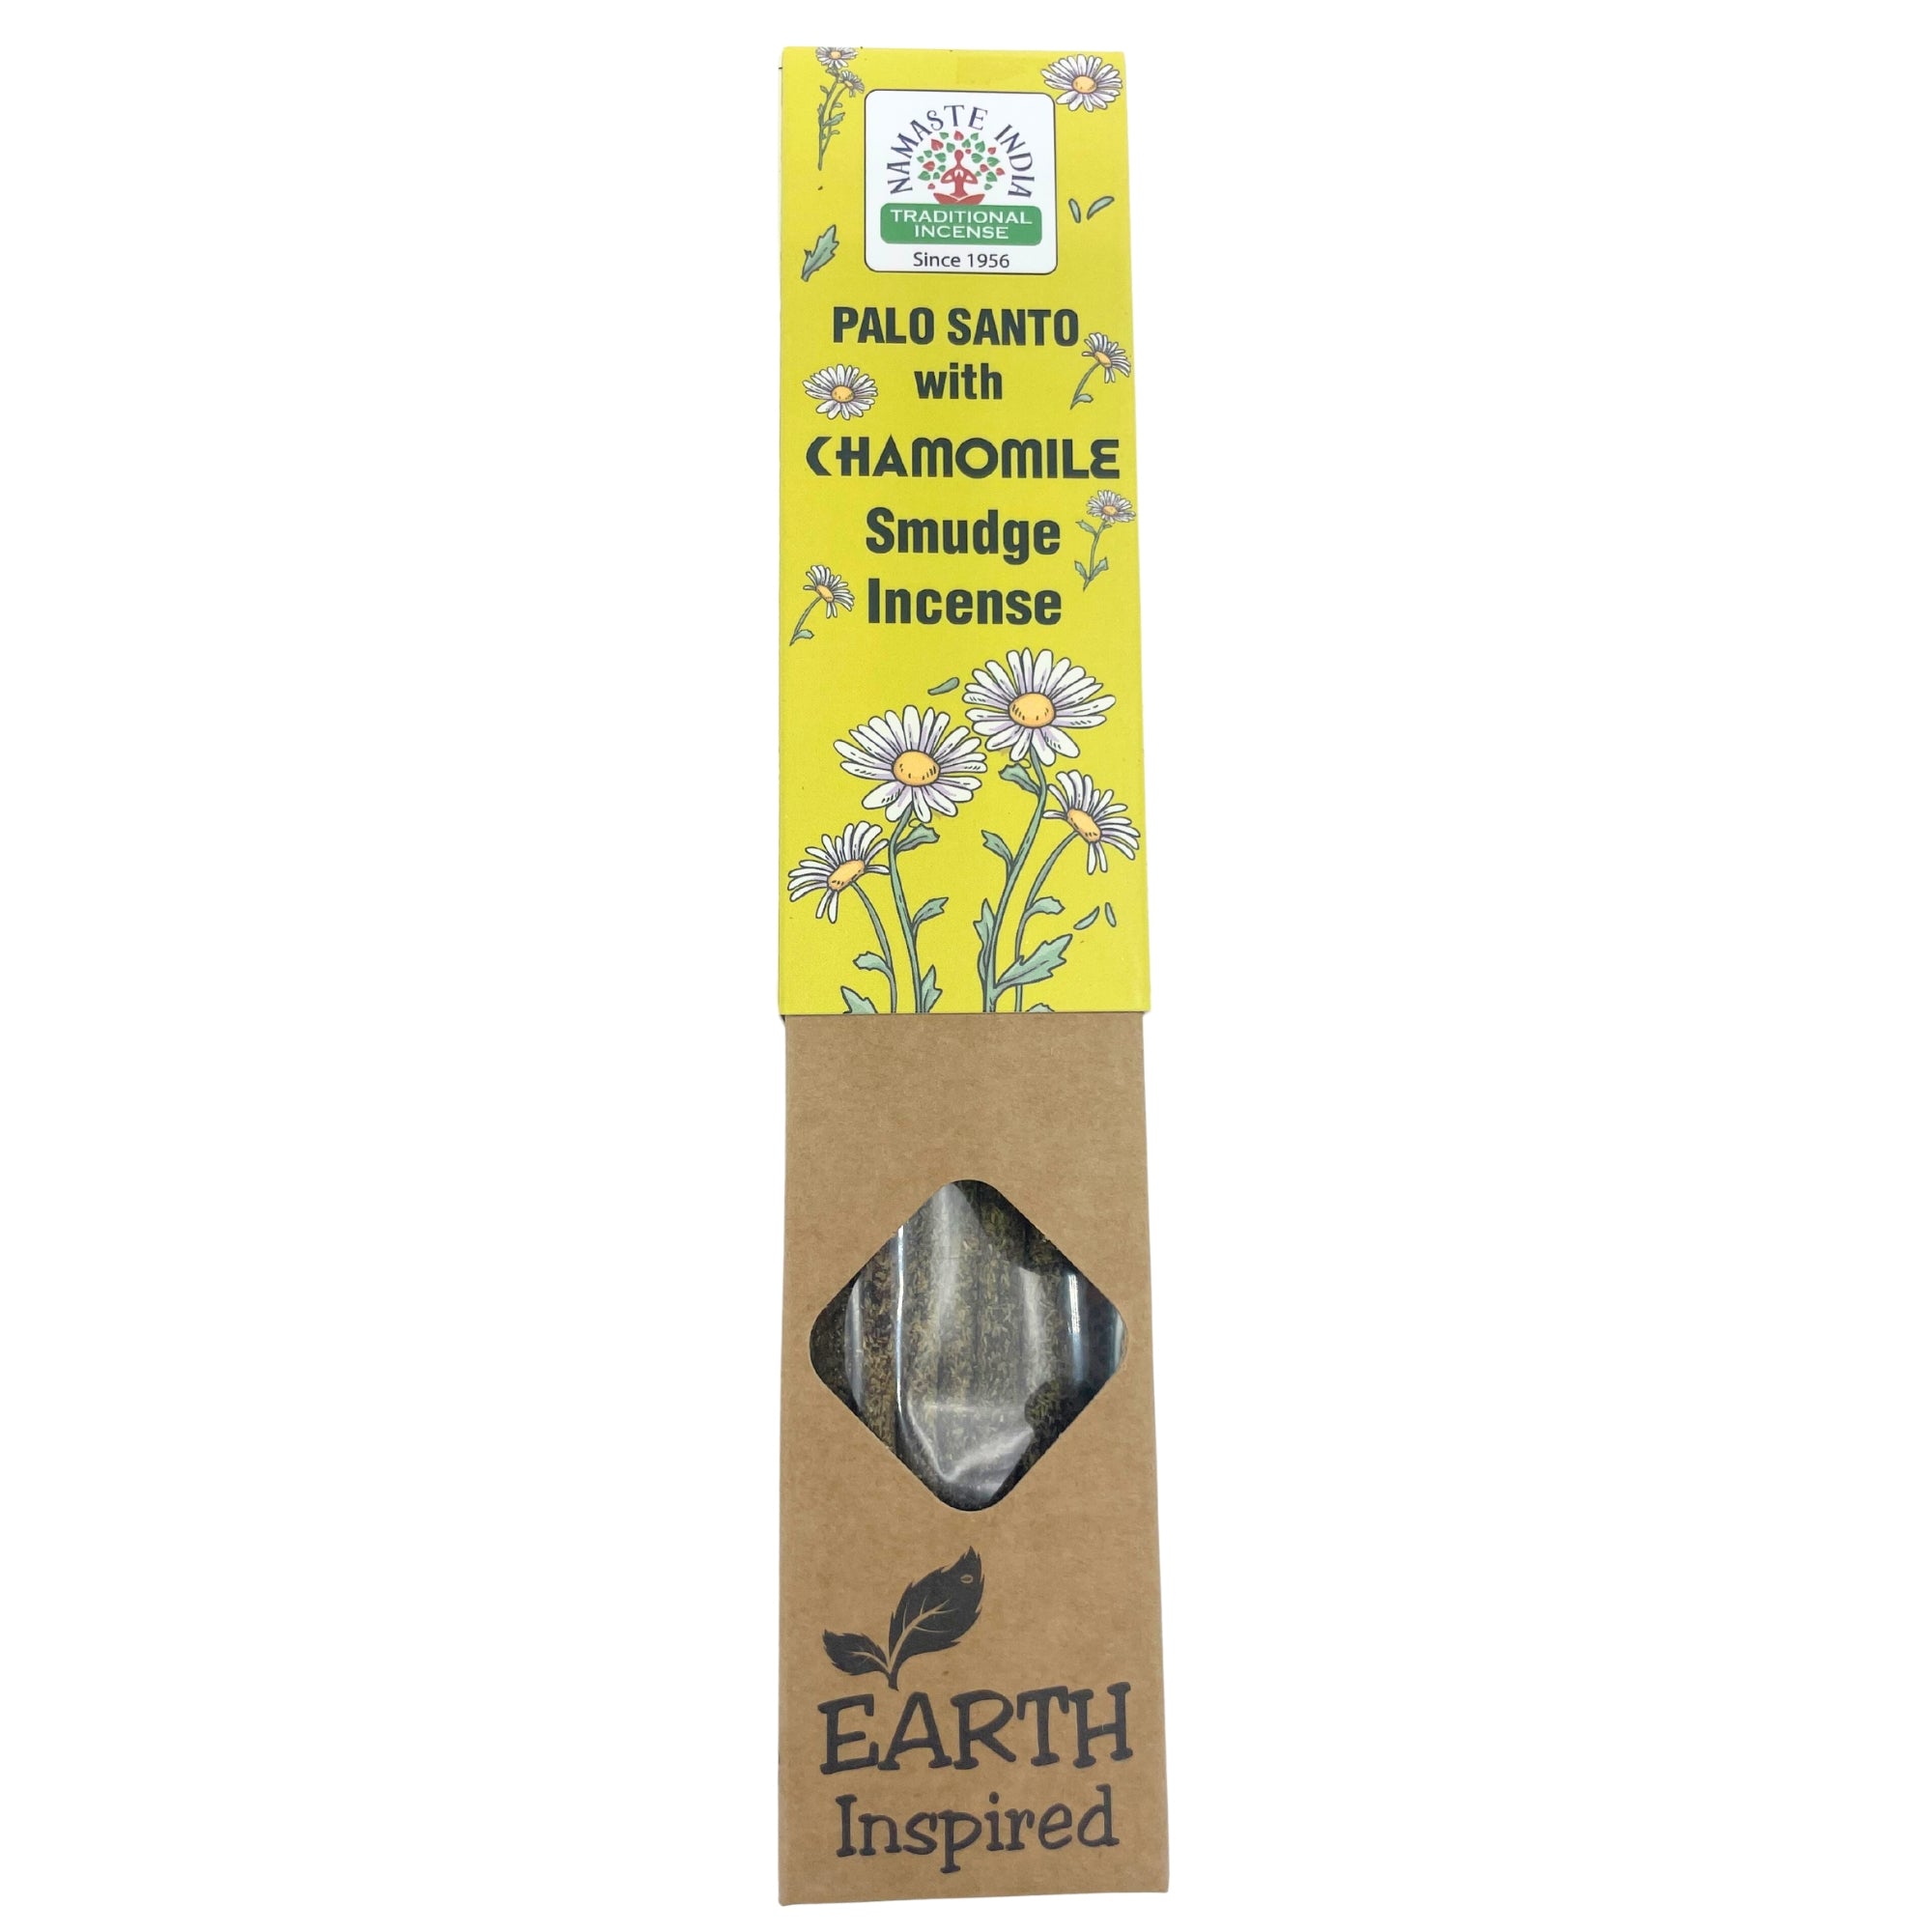 View Earth Inspired Smudge Incense Chamomile information